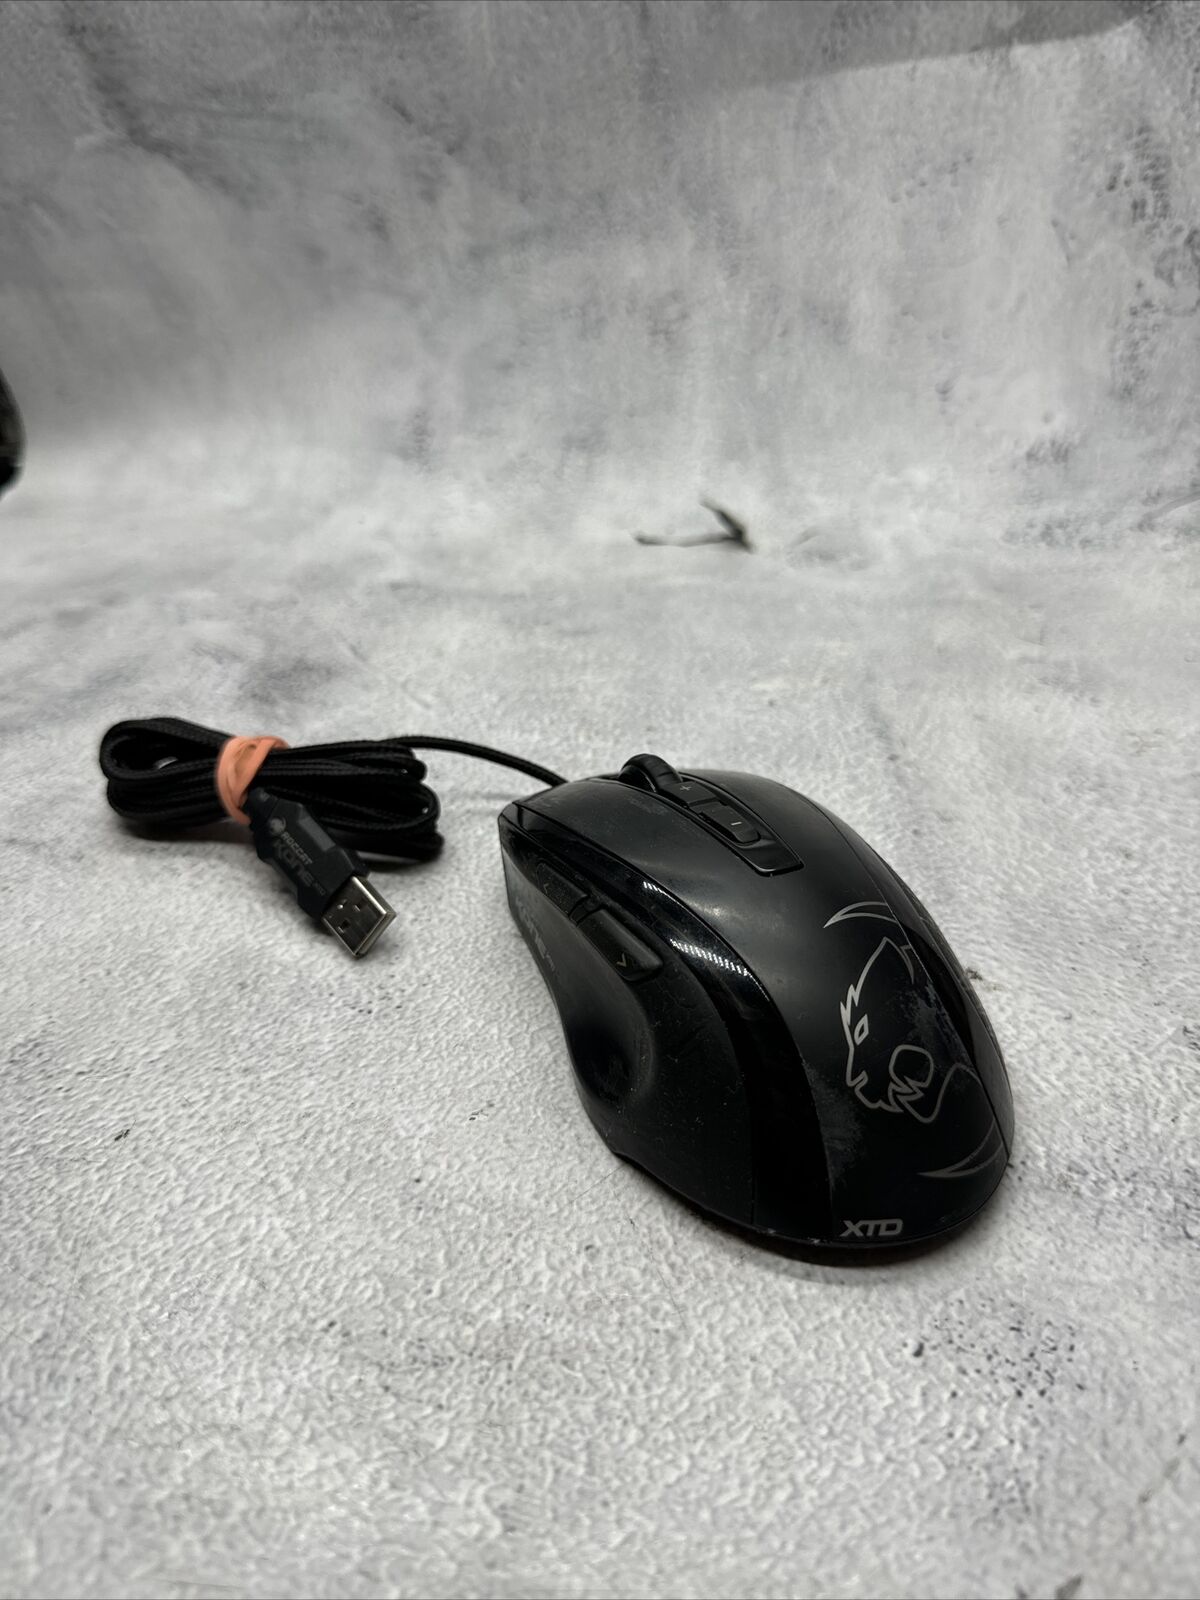 ROCCAT ROC-11-810 KONE XTD - Max Customization Gaming Mouse (see details) P